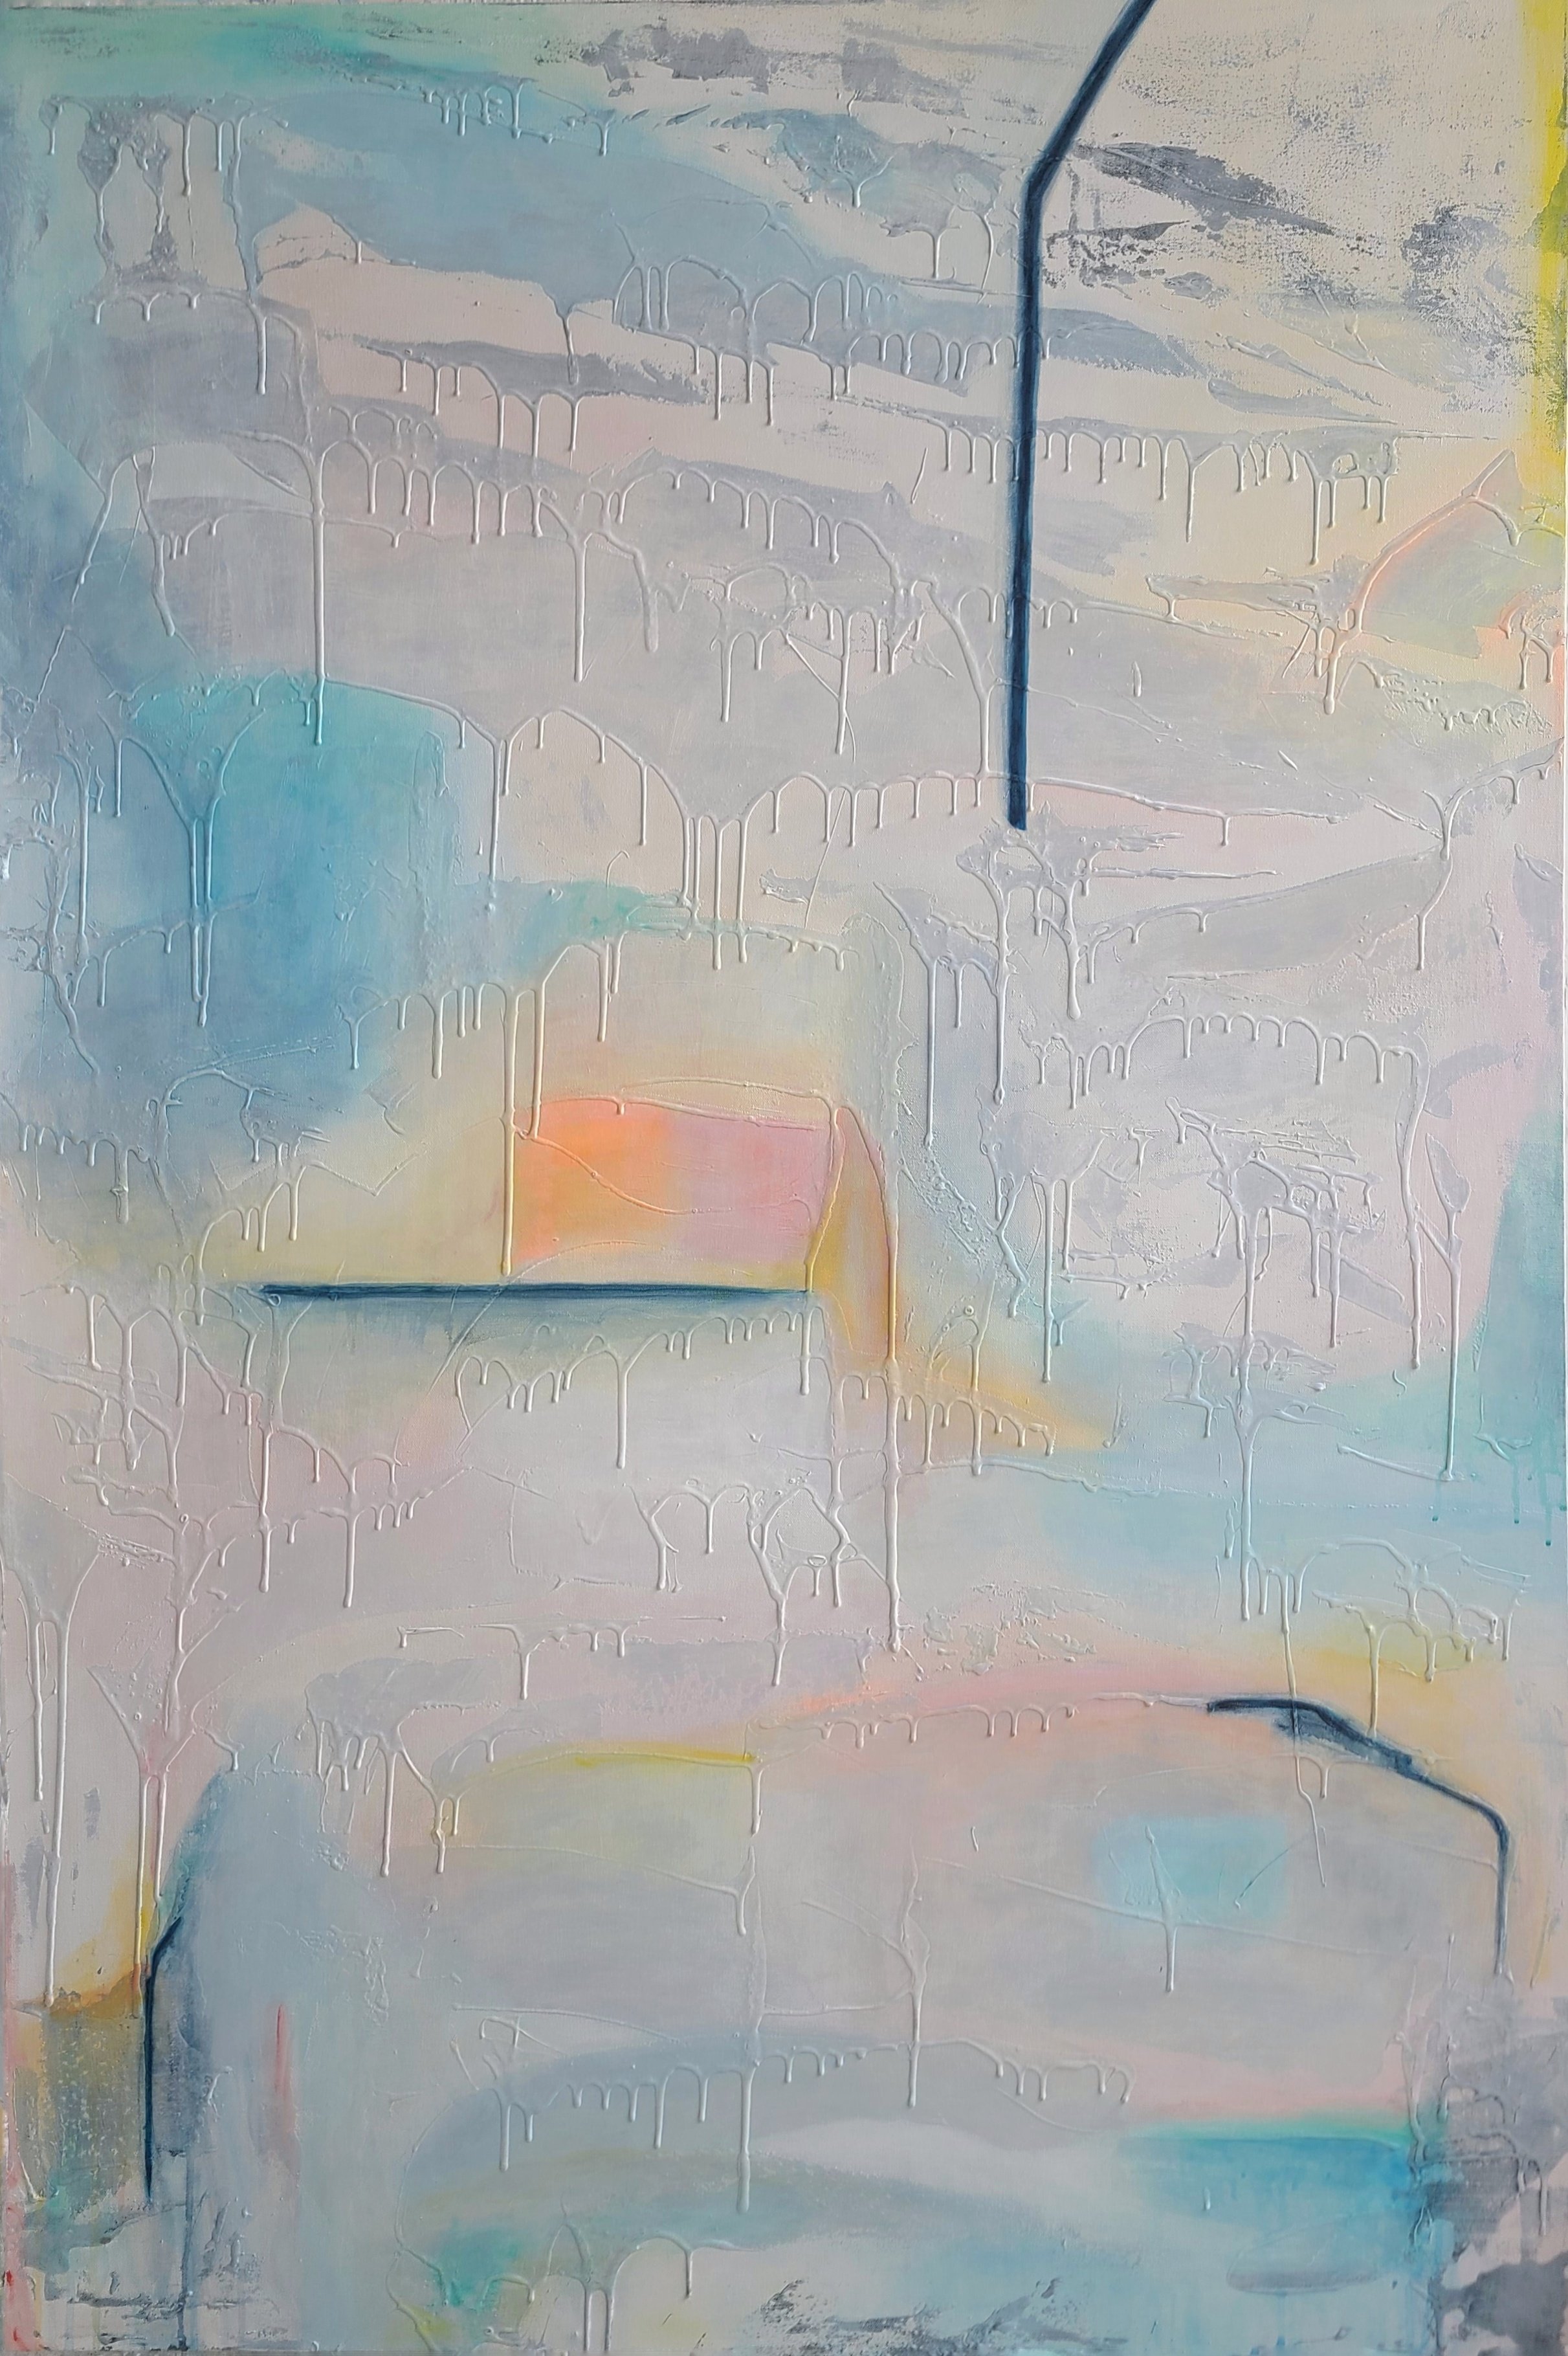   Linds Miyo’s painting, Play with the Shadows, is an abstract painting of white, light blue, grey, and some hints of orange yellow and pink. Has some strong, dark blue lines, but mainly consists of soft blends of light colours and subtle paint drips